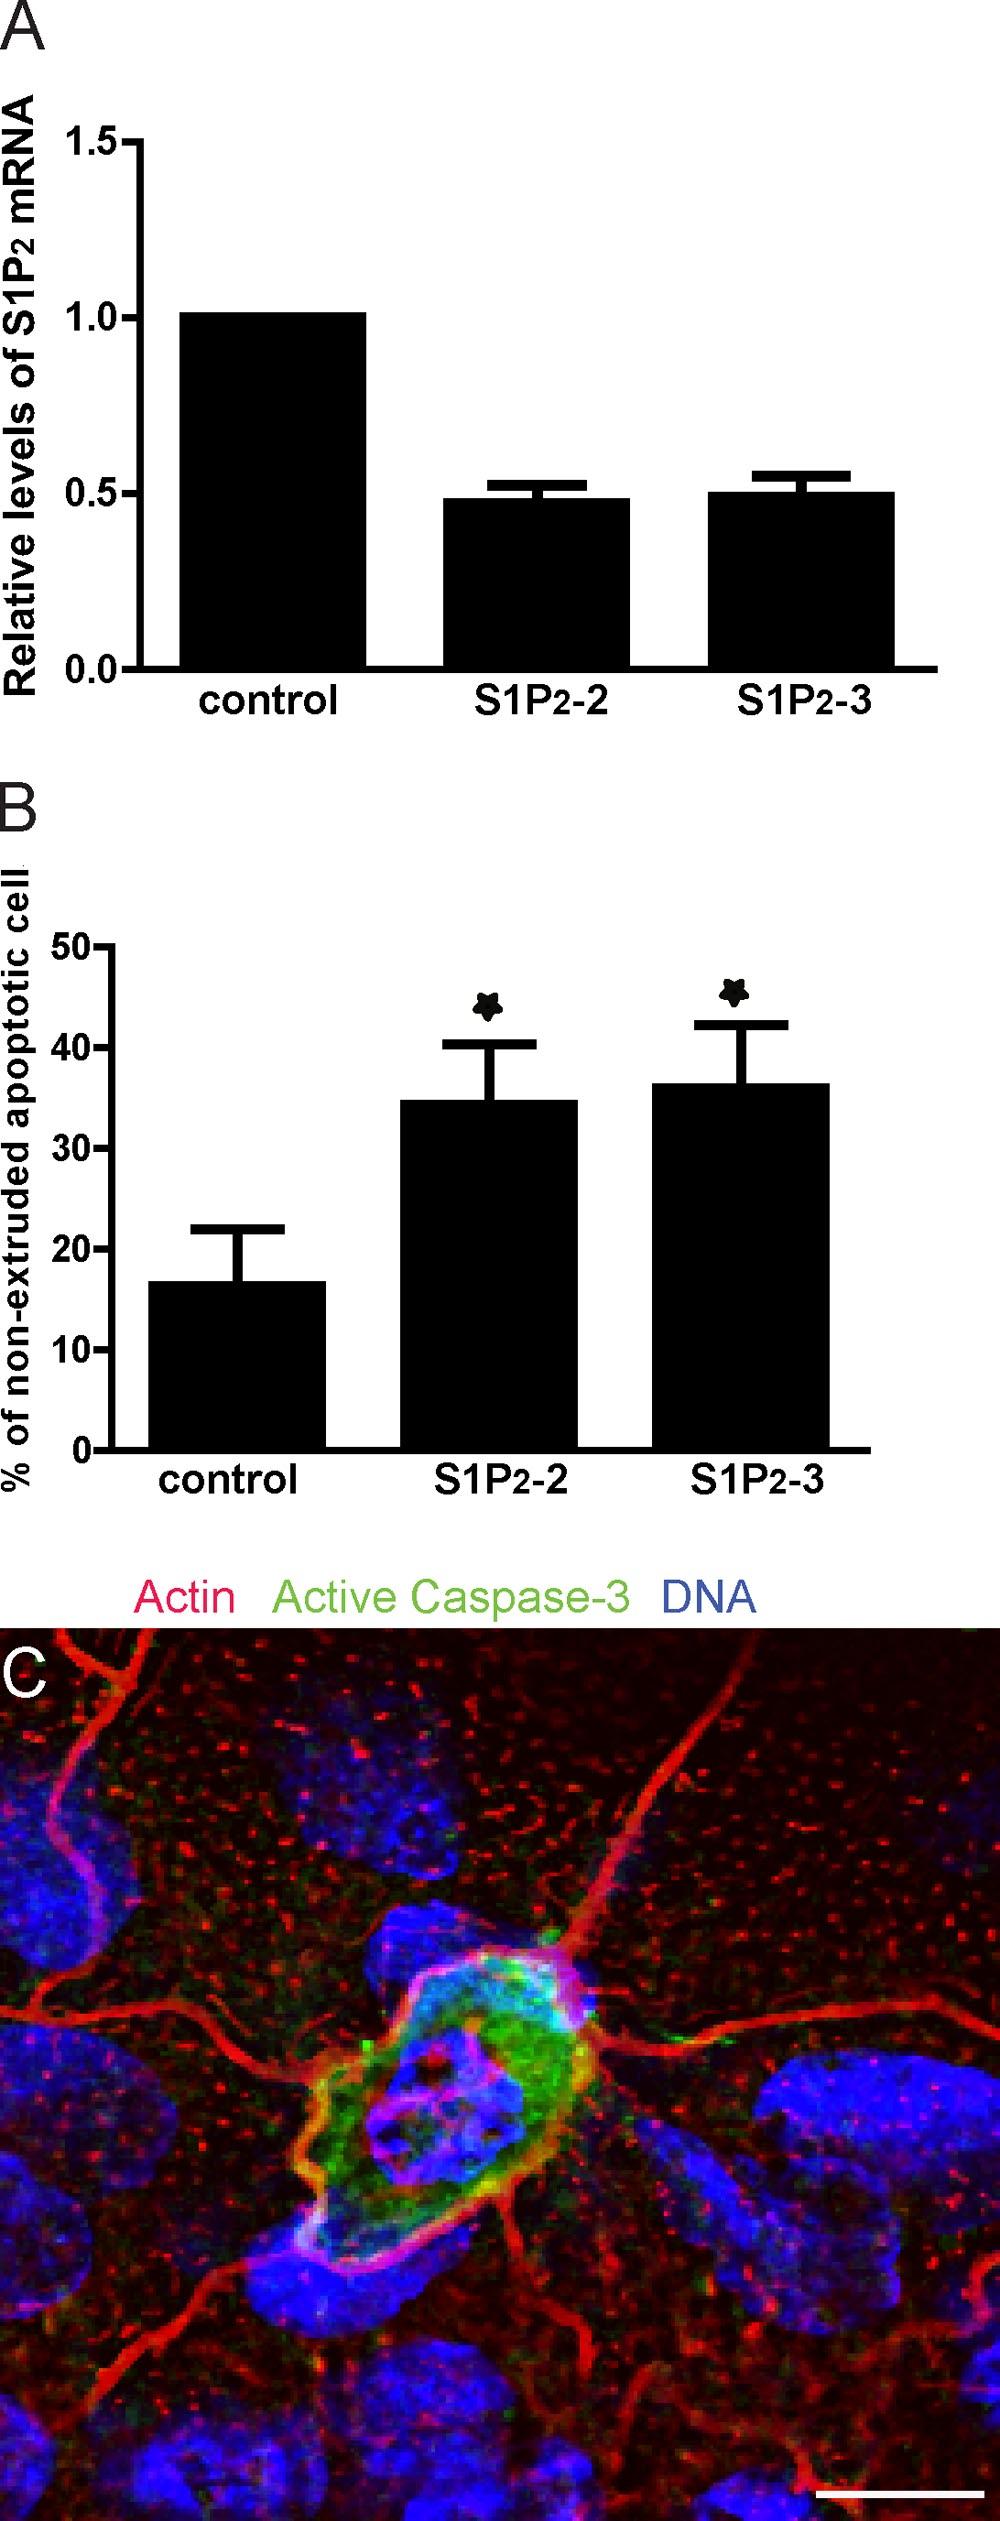 Figure S3. Apoptotic cell extrusion requires the signaling mediated by S1P 2. (A) qrt-pcr confirms knockdown of S1P 2 by shs1p 2-2 and shs1p 2-3 in HBE cells.